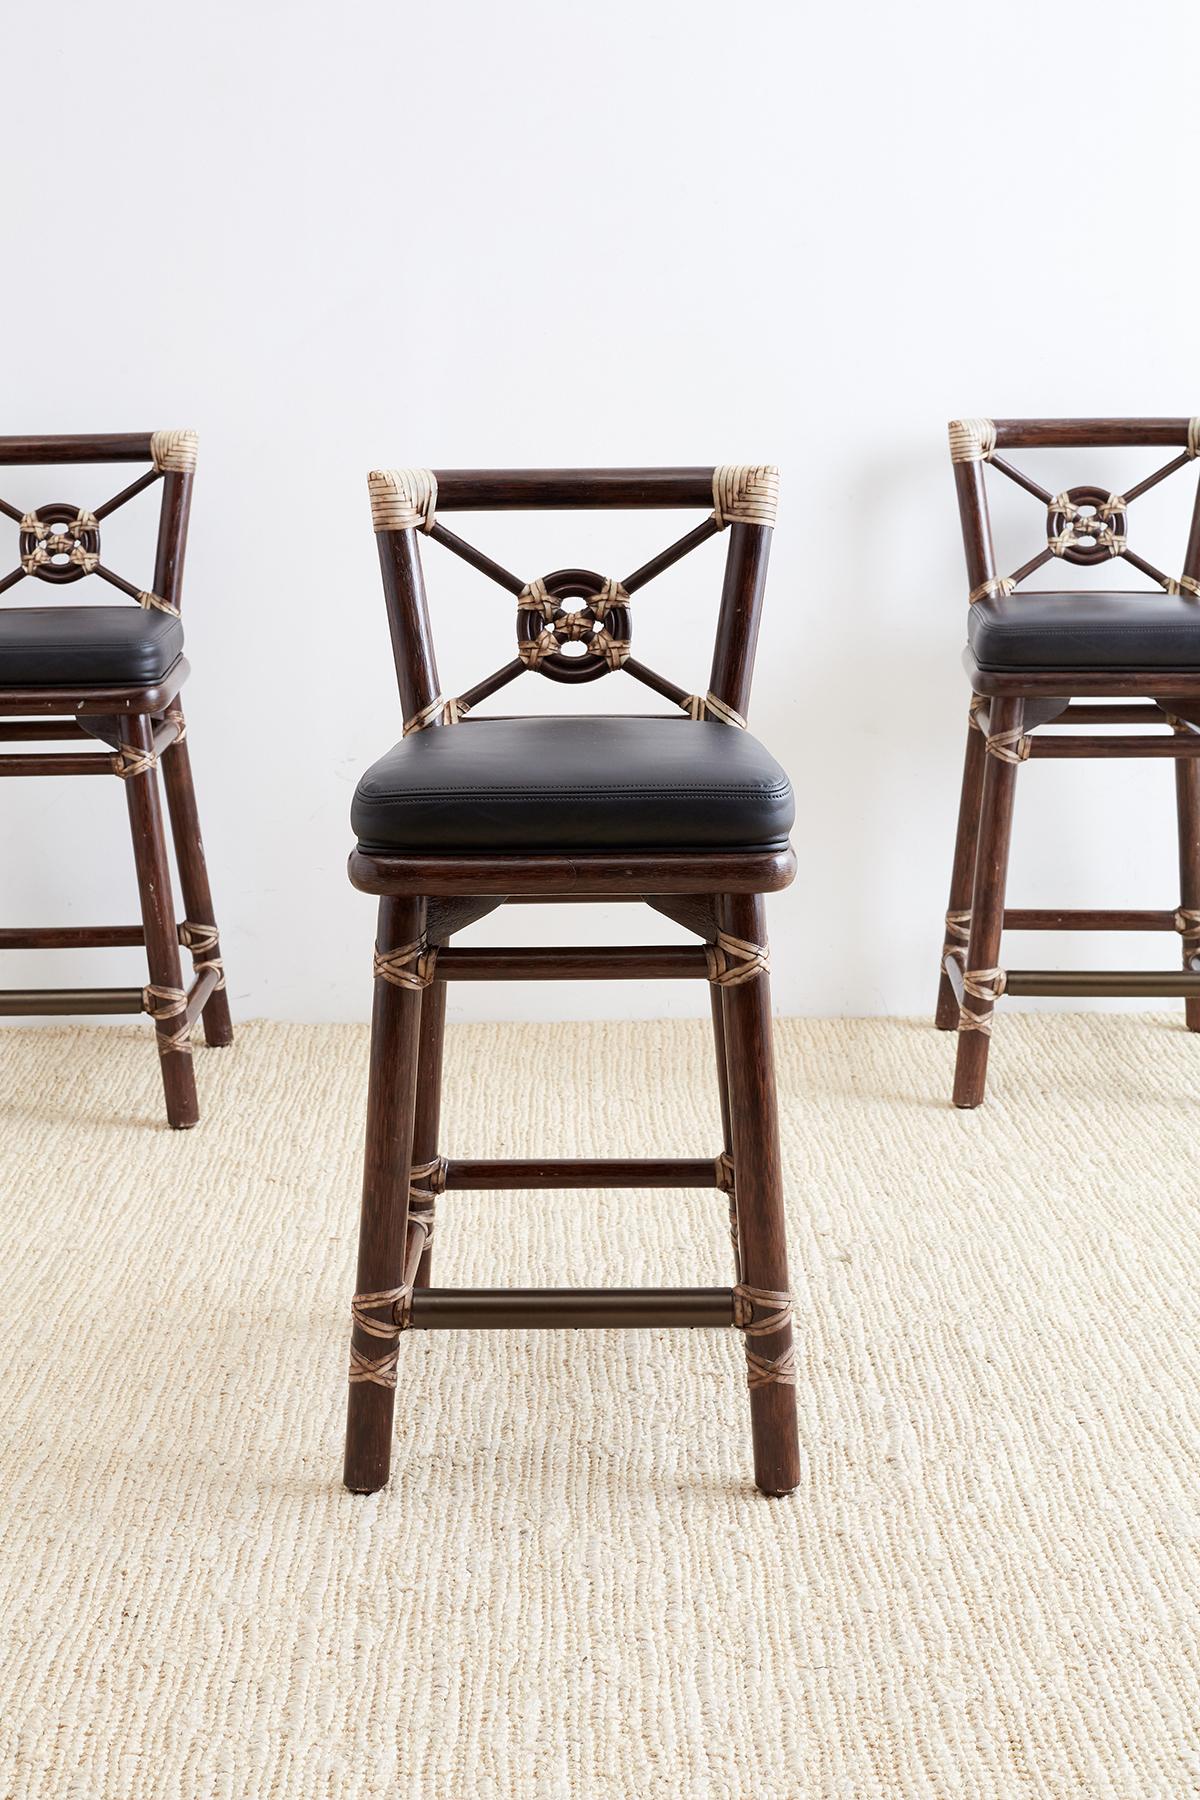 Handsome McGuire counter height barstools featuring a handcrafted, thick rattan frame with a deep espresso finish. Decorated with a target design back splat and reinforced with a contrasting leather rawhide in a light cream color. Heavy and solid